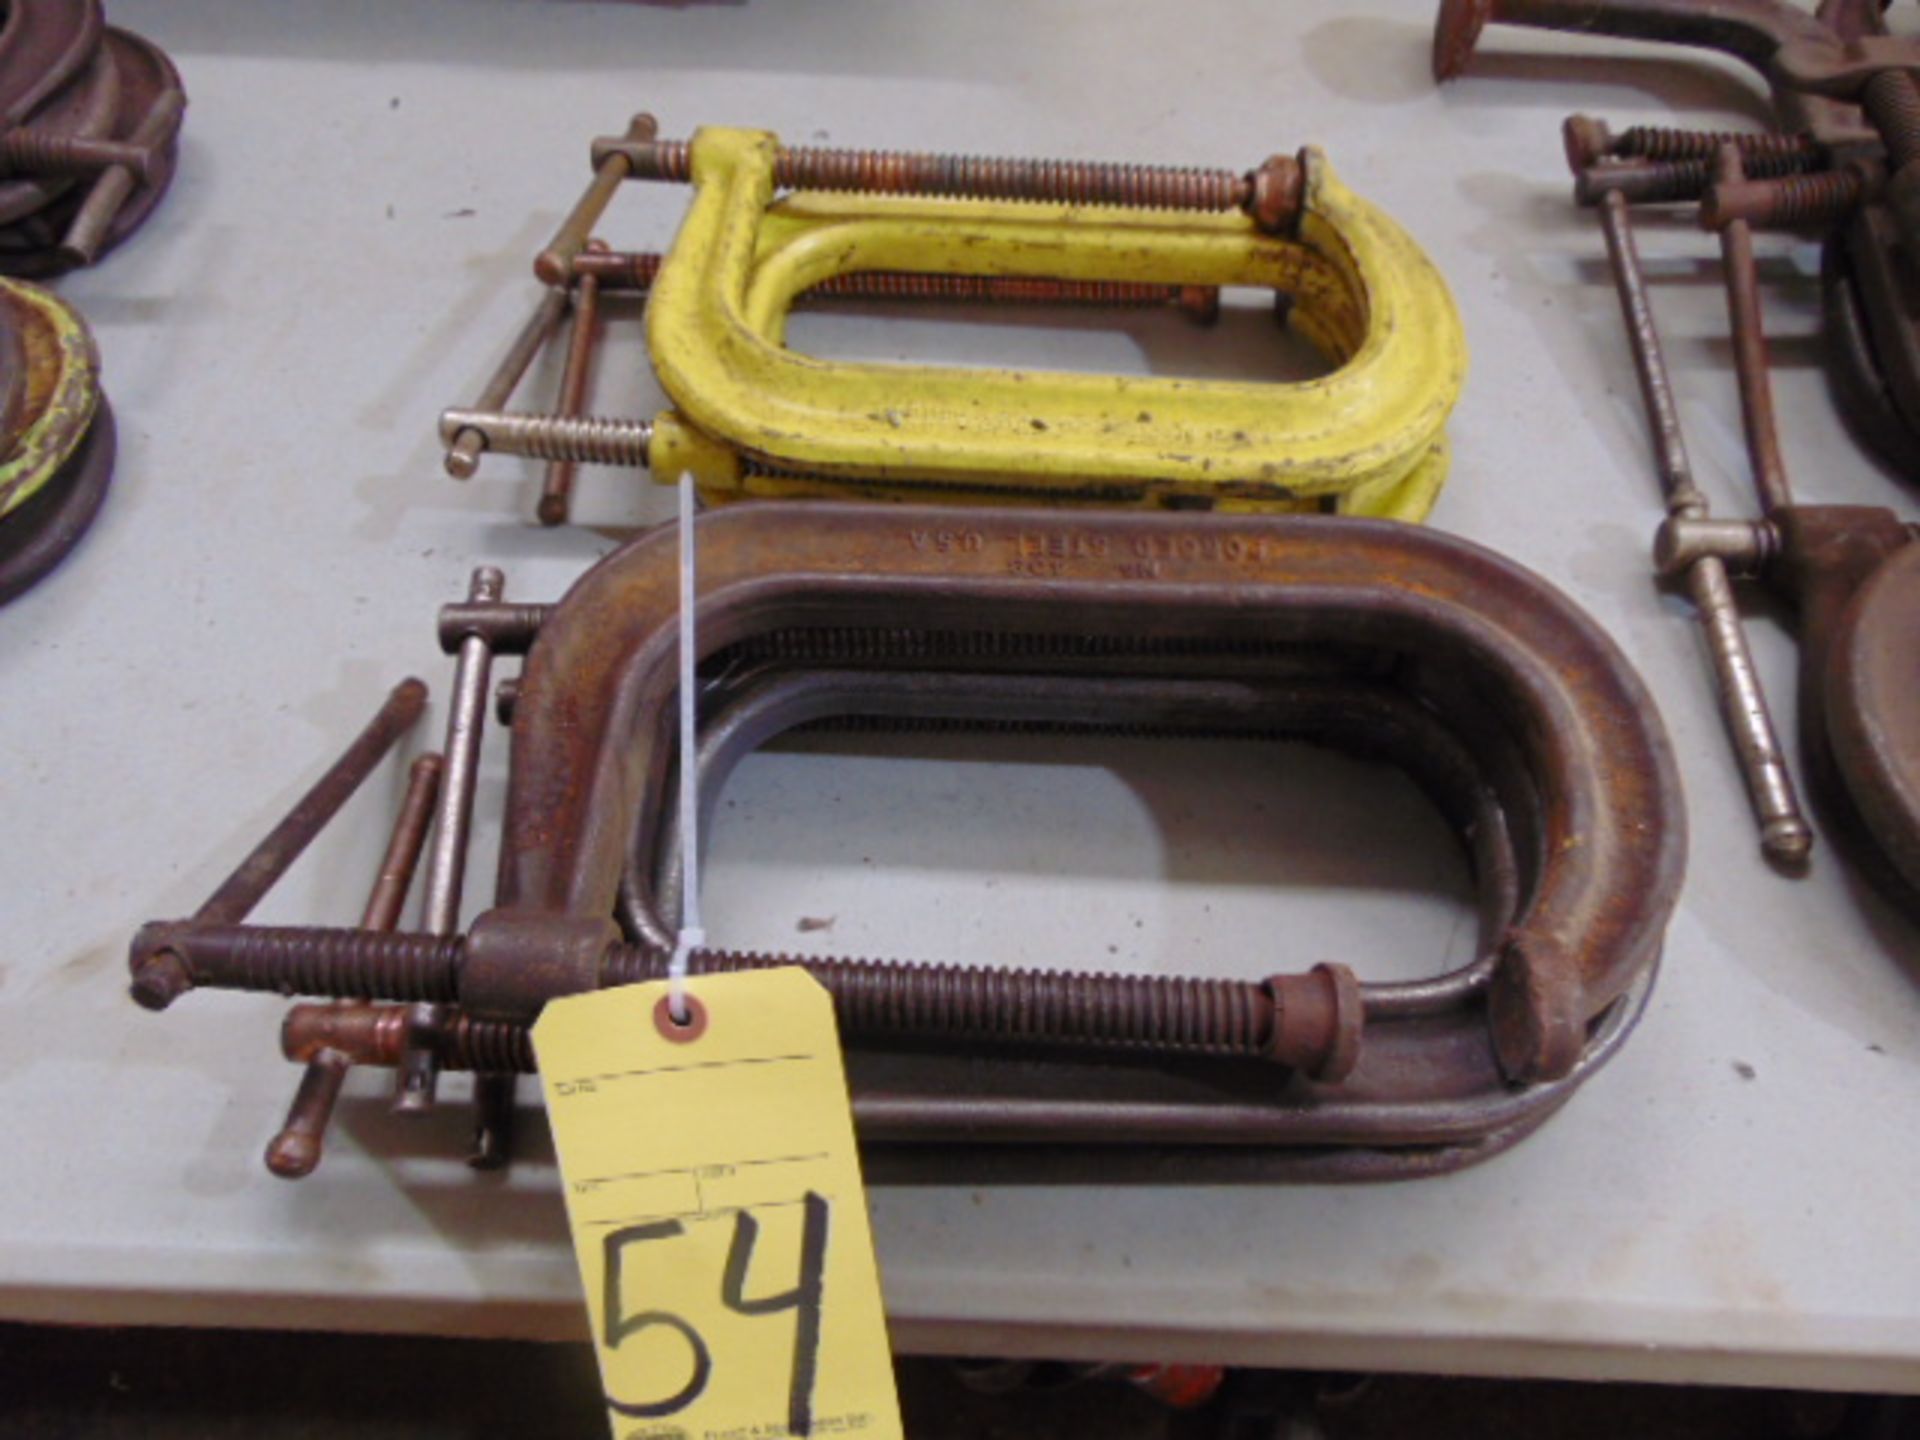 LOT OF C-CLAMPS (7), 8"